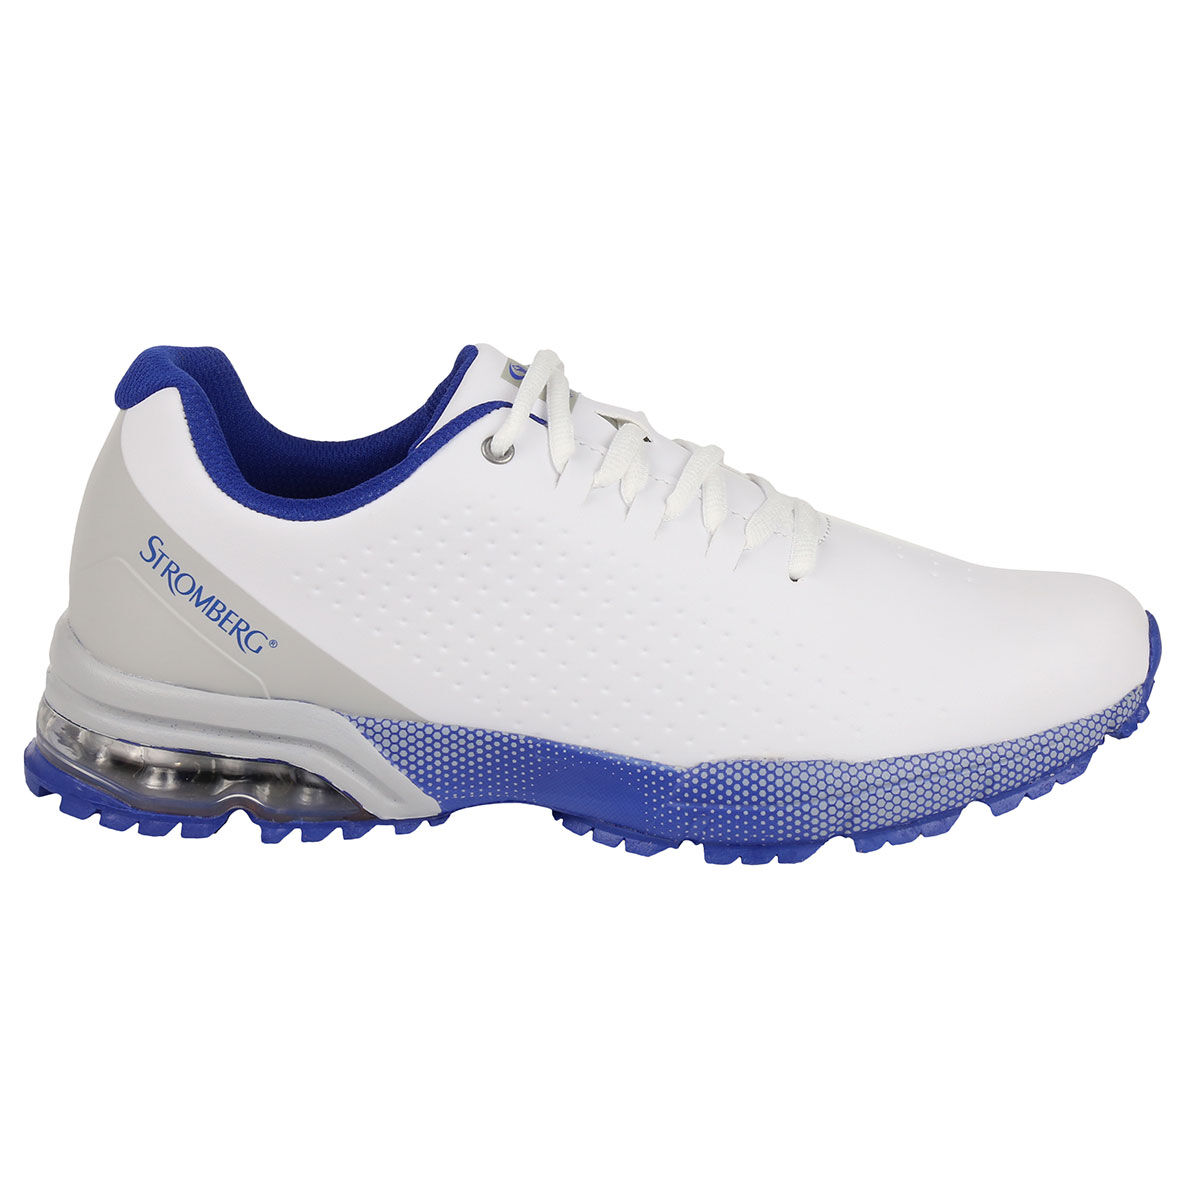 Stromberg White and Blue Waterproof Ailsa Spikeless Golf Shoes, Size: 7 | American Golf